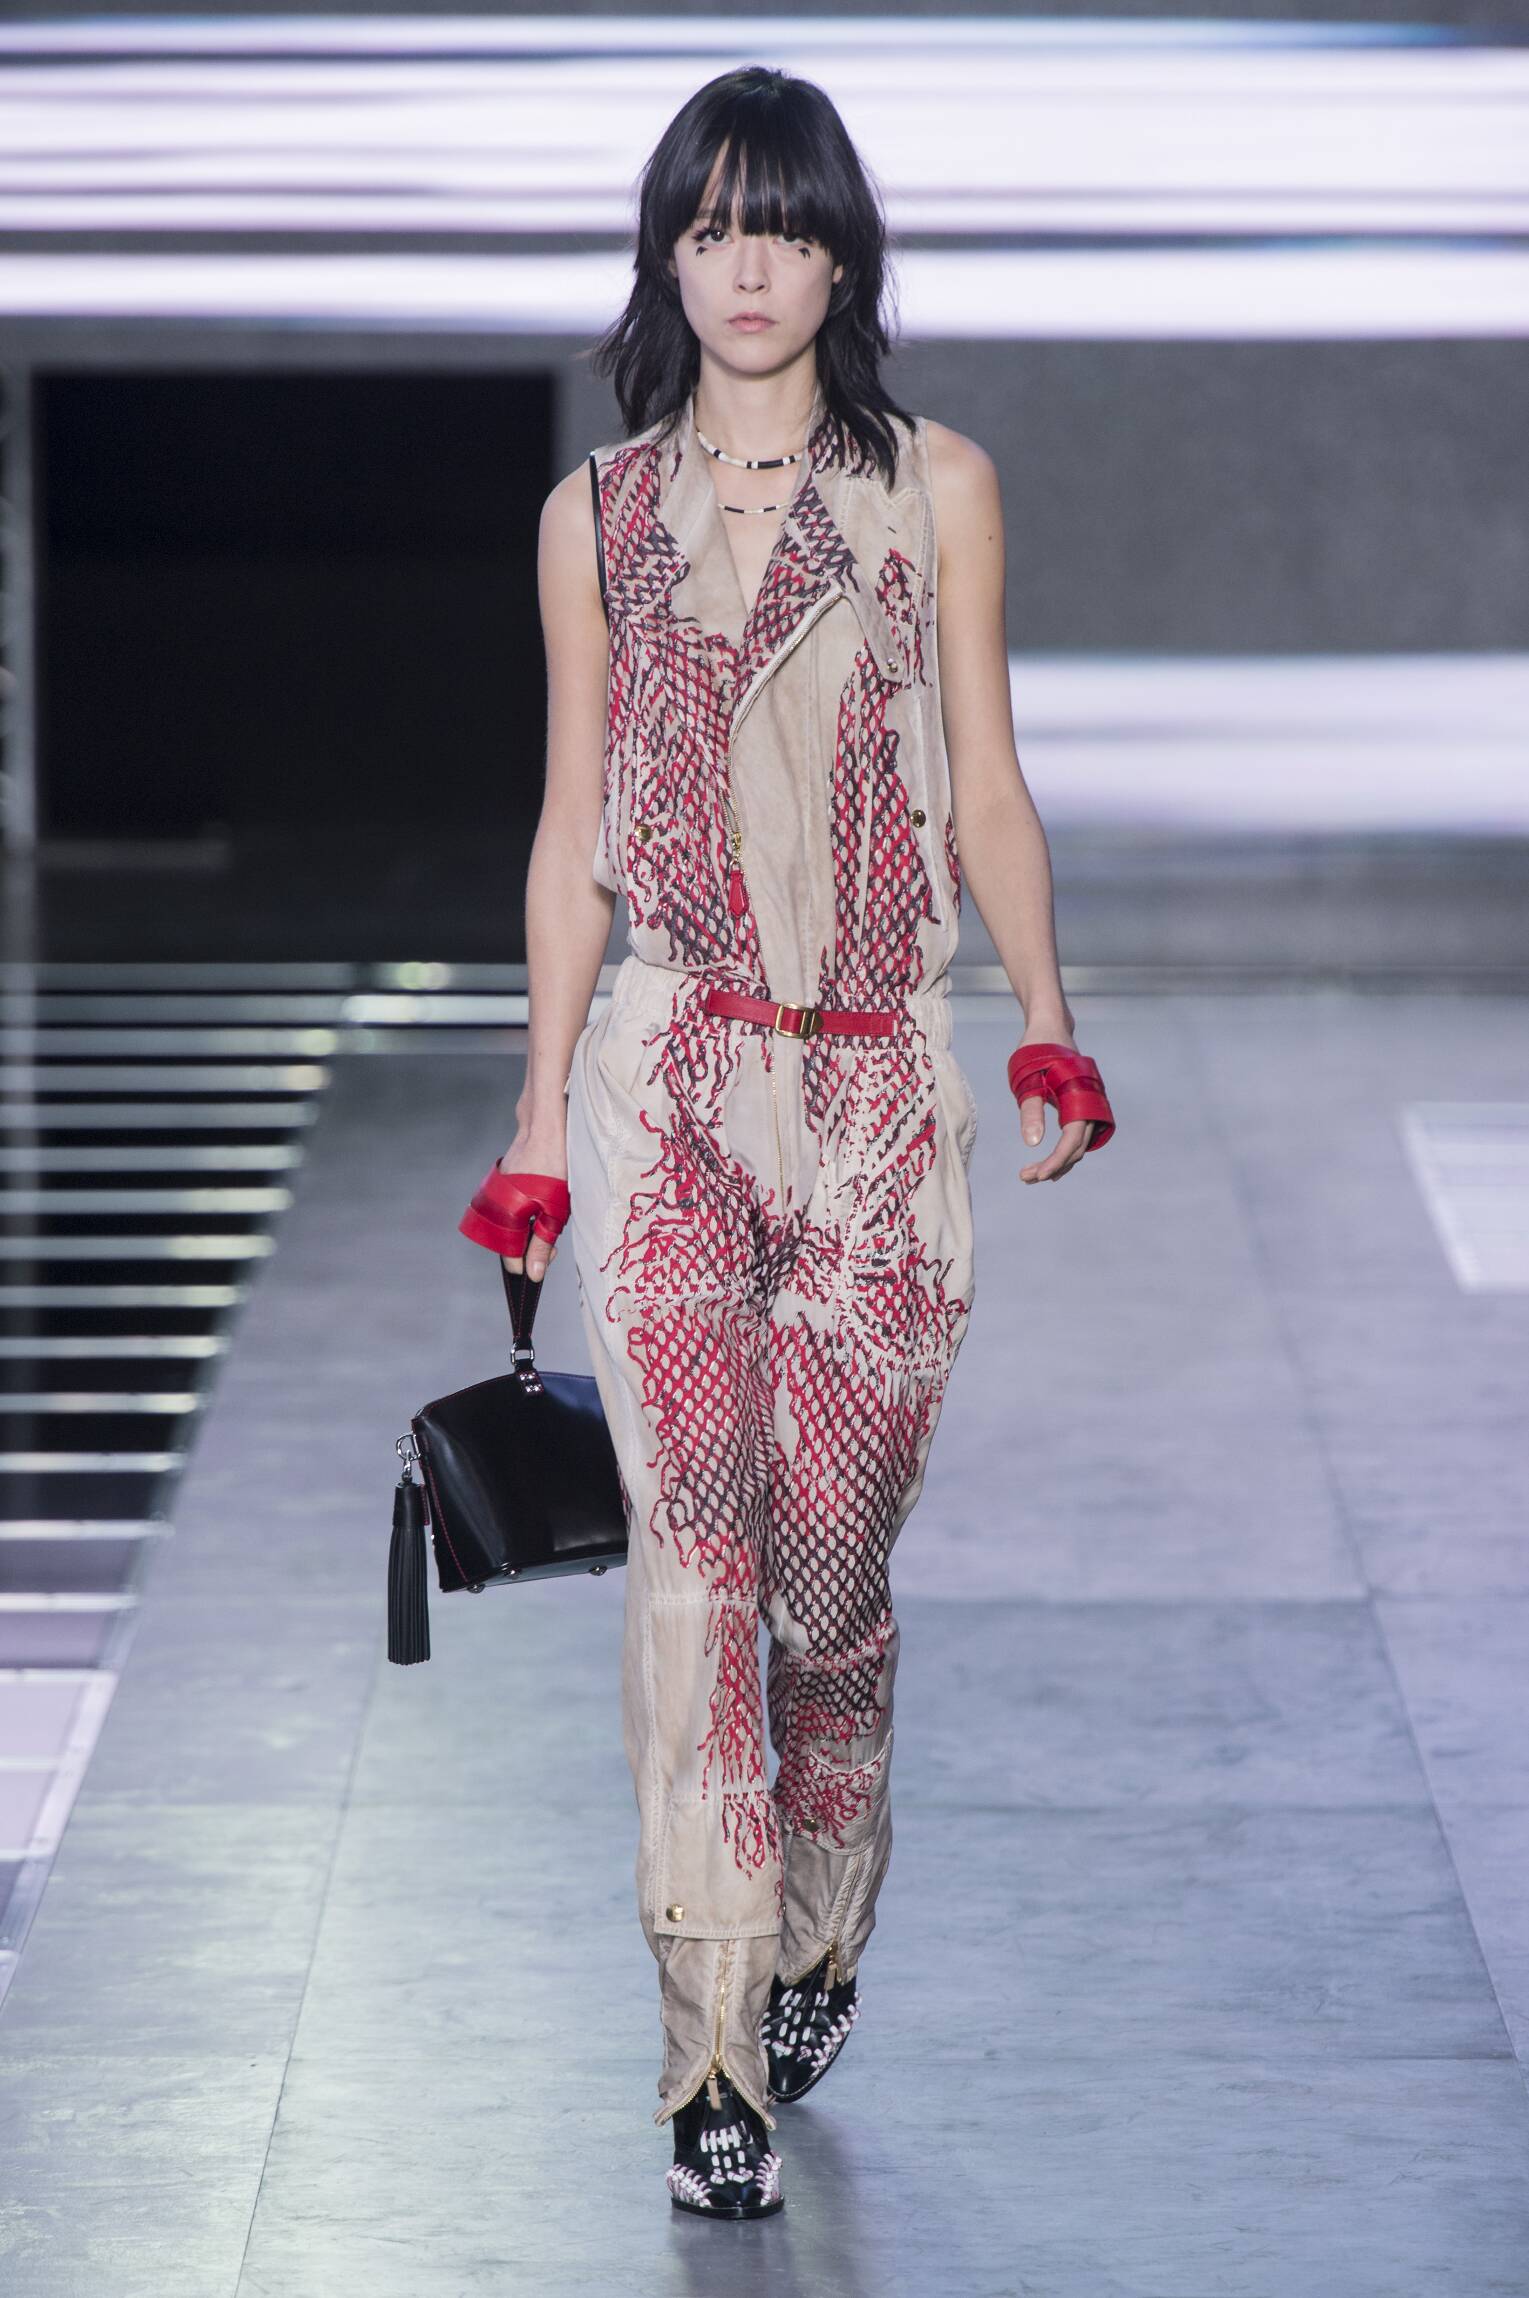 LOUIS VUITTON SPRING SUMMER 2016 WOMEN'S COLLECTION | The Skinny Beep